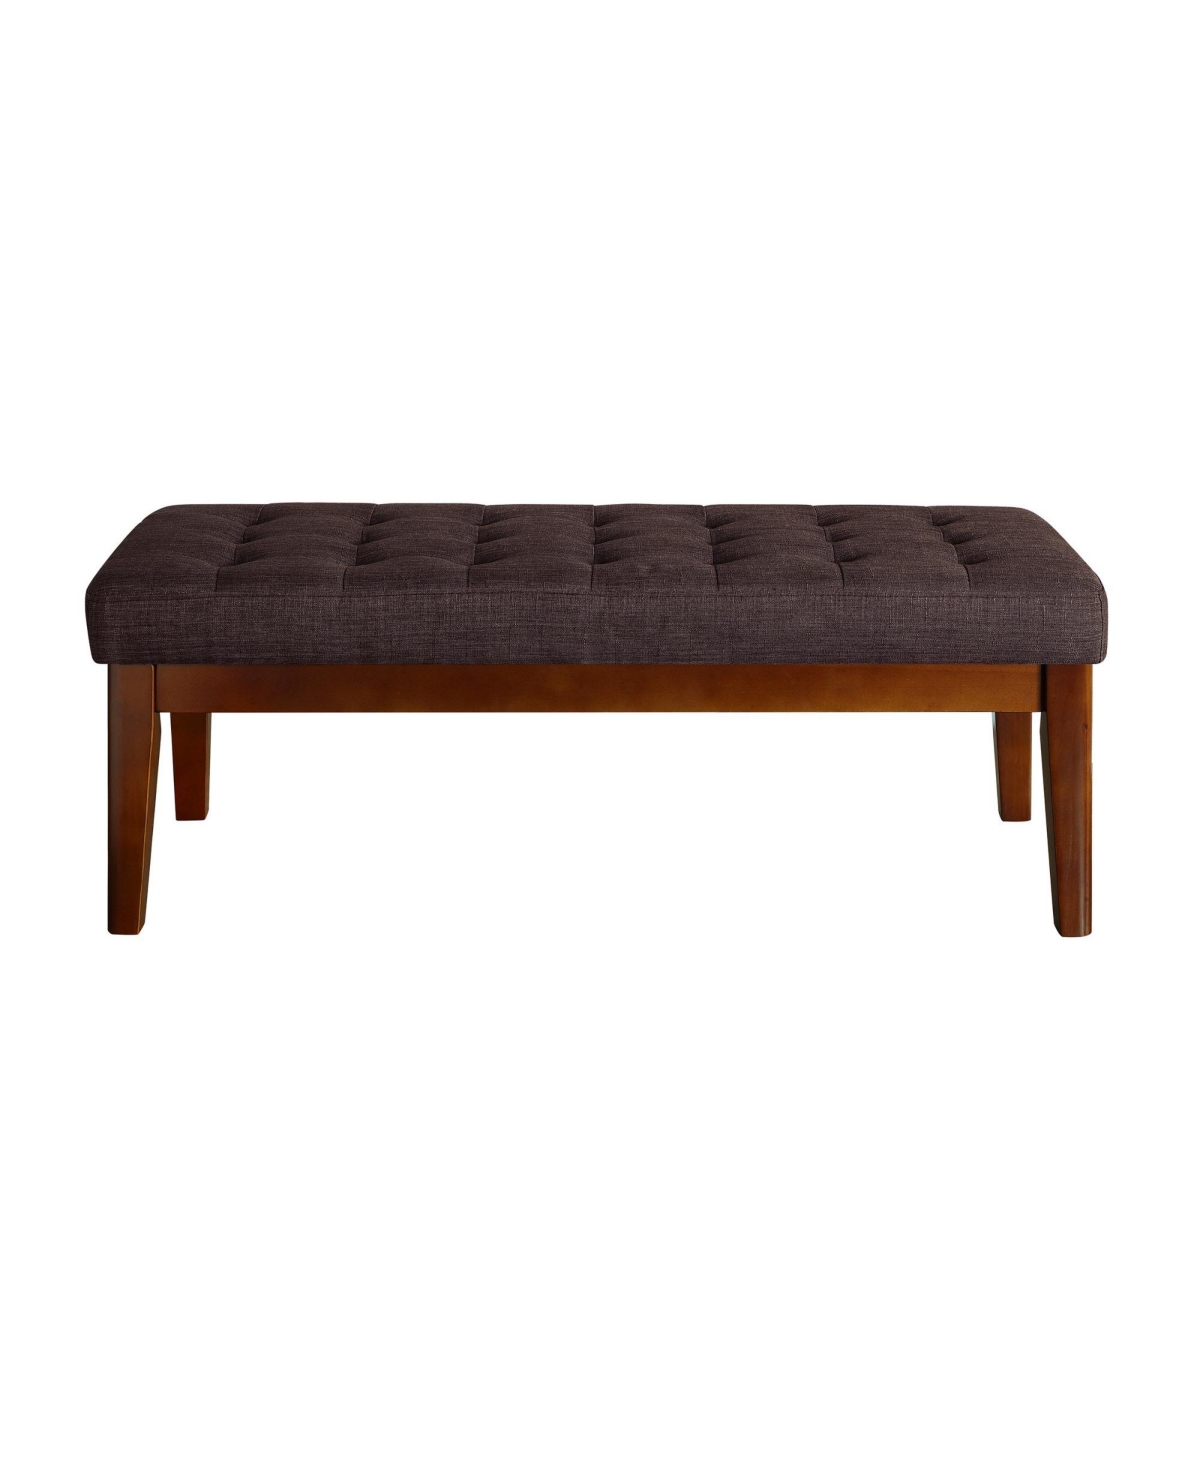 Elle Decor Claire Tufted Upholstered Bench